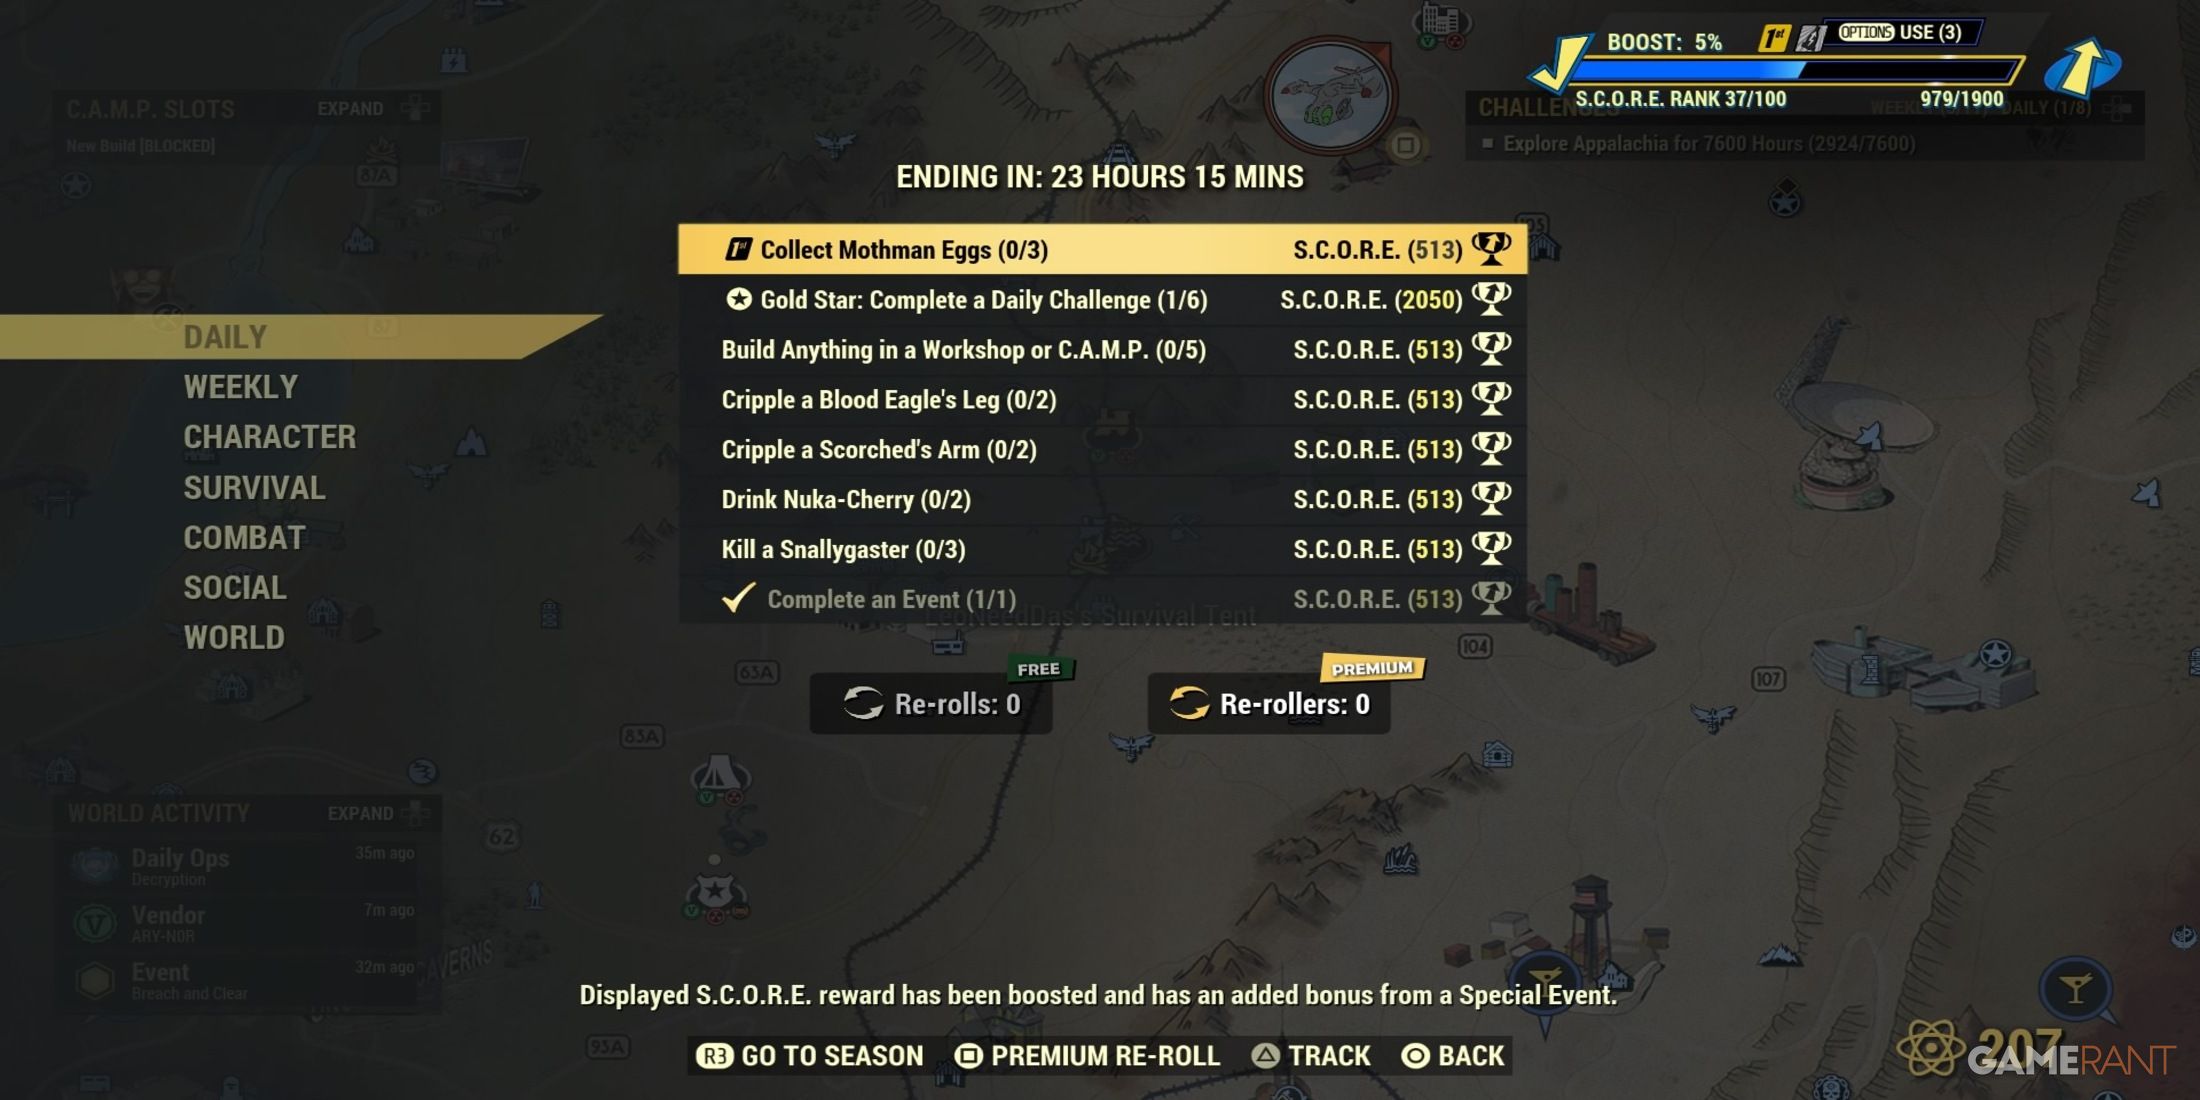 A List of Daily Challenges in Fallout 76